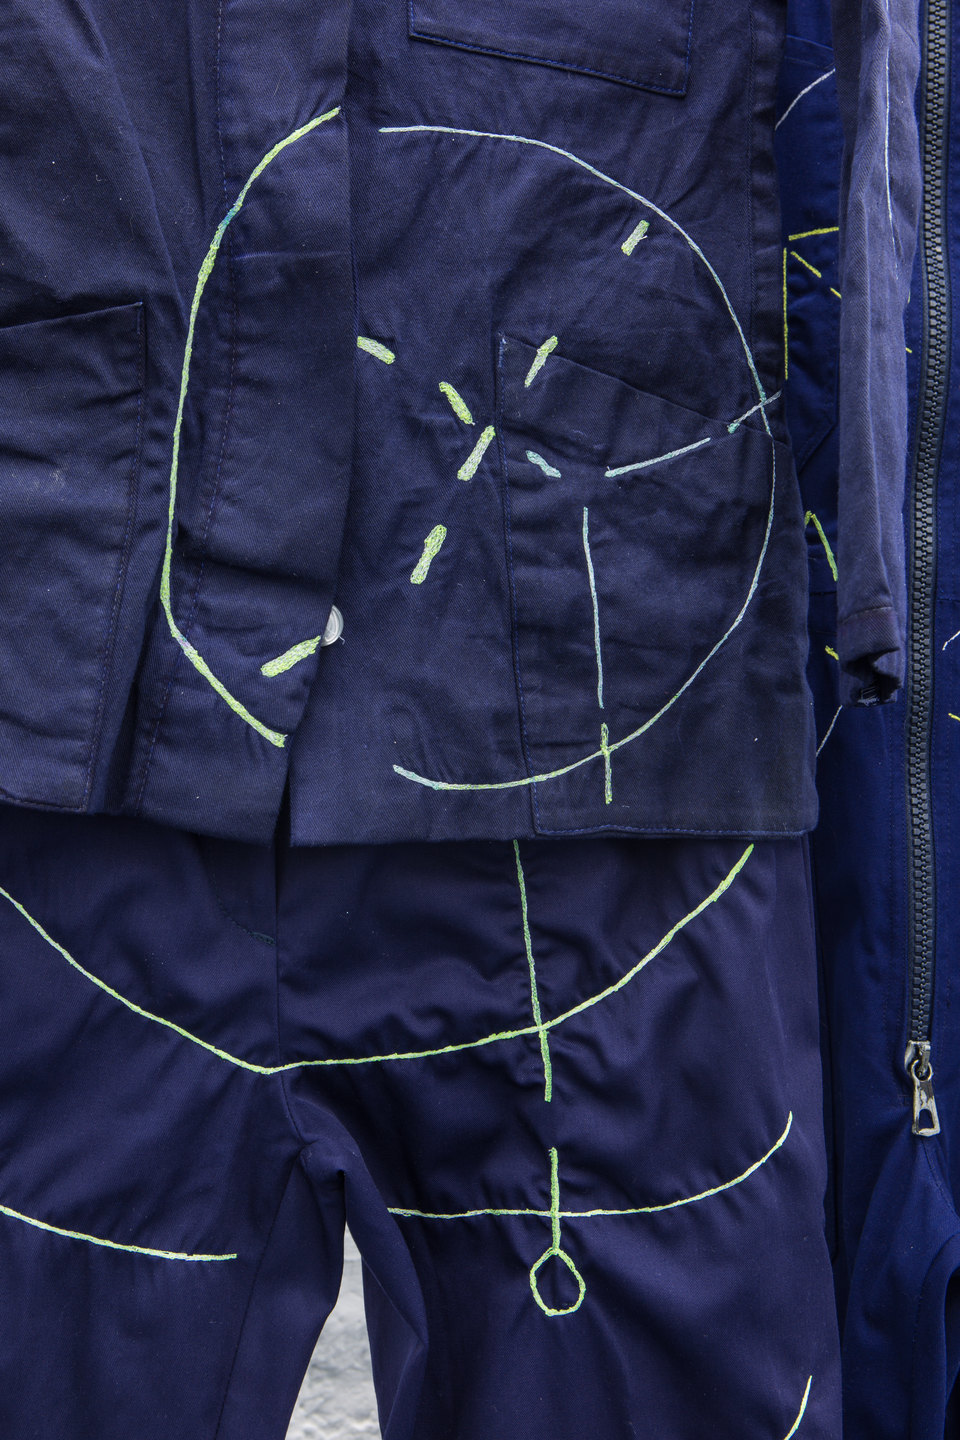 Angharad Williams and Mathis Gasser, 'Navigator Suits' (detail), 2018, Hergest:Nant, Cell Project Space